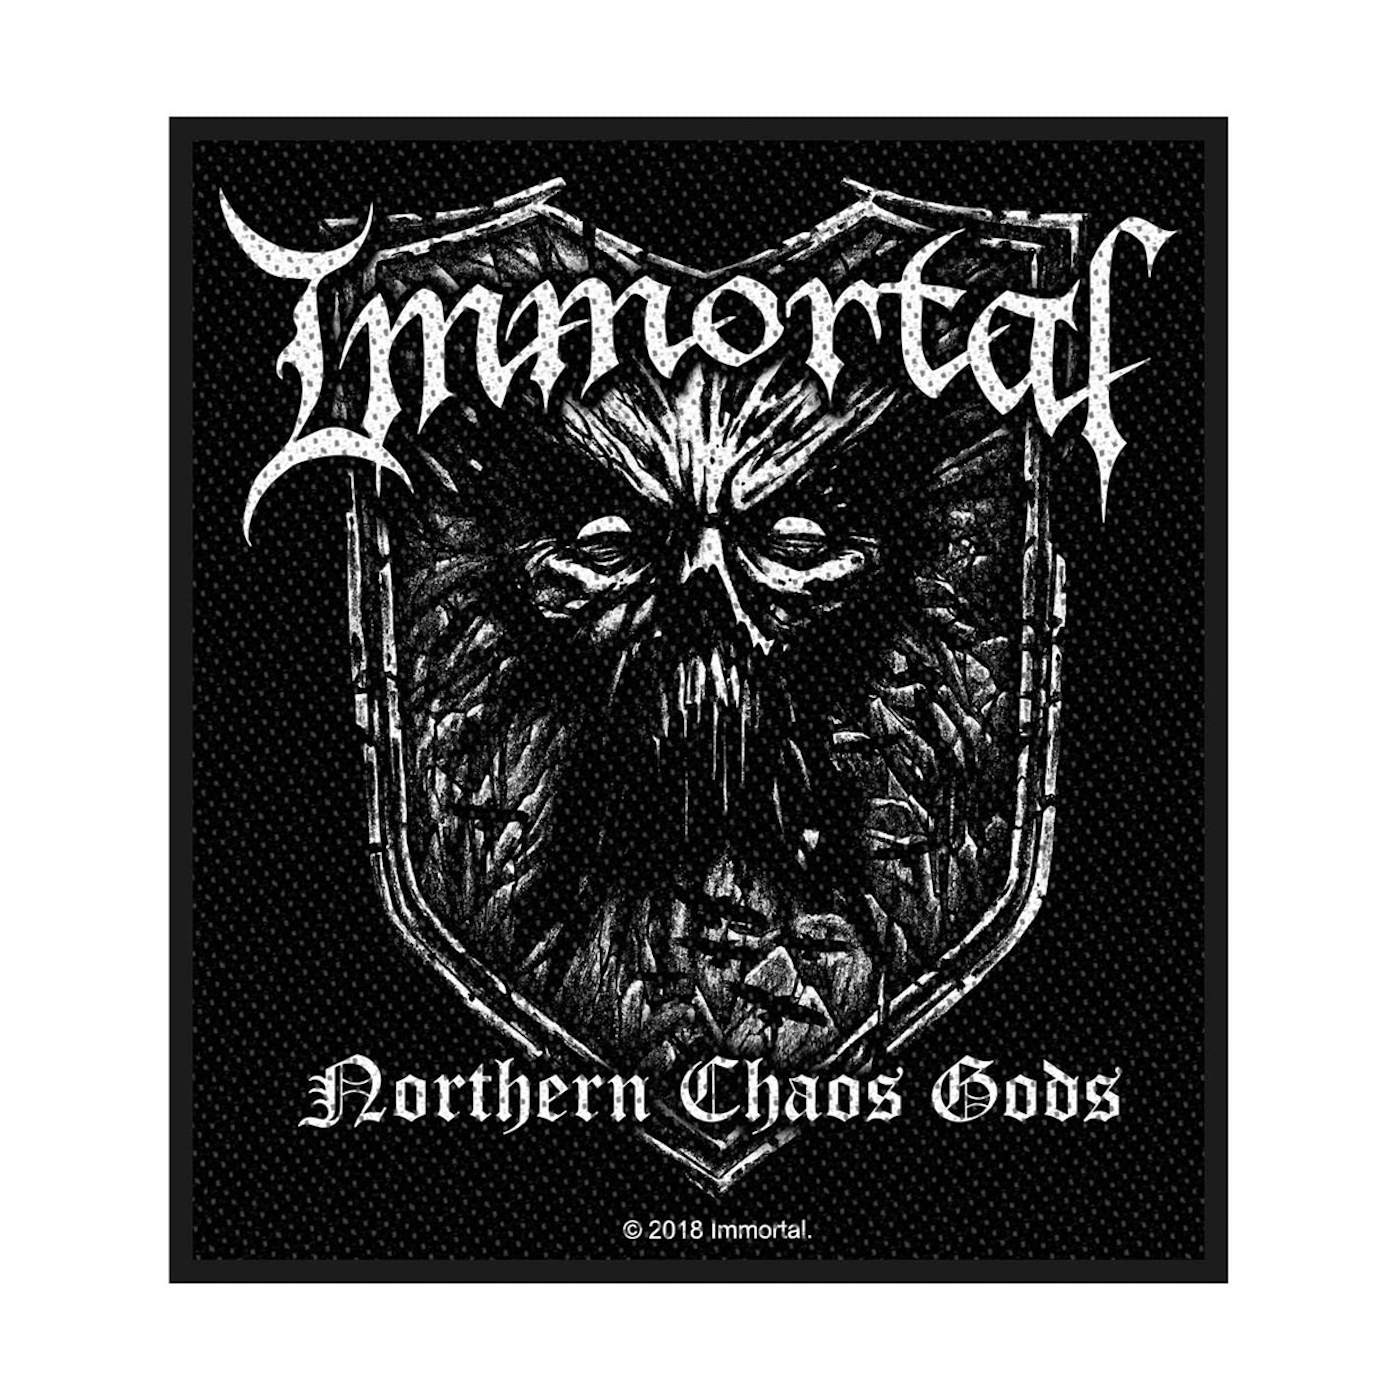 Immortal Sew-On Patch - Northern Chaos Gods